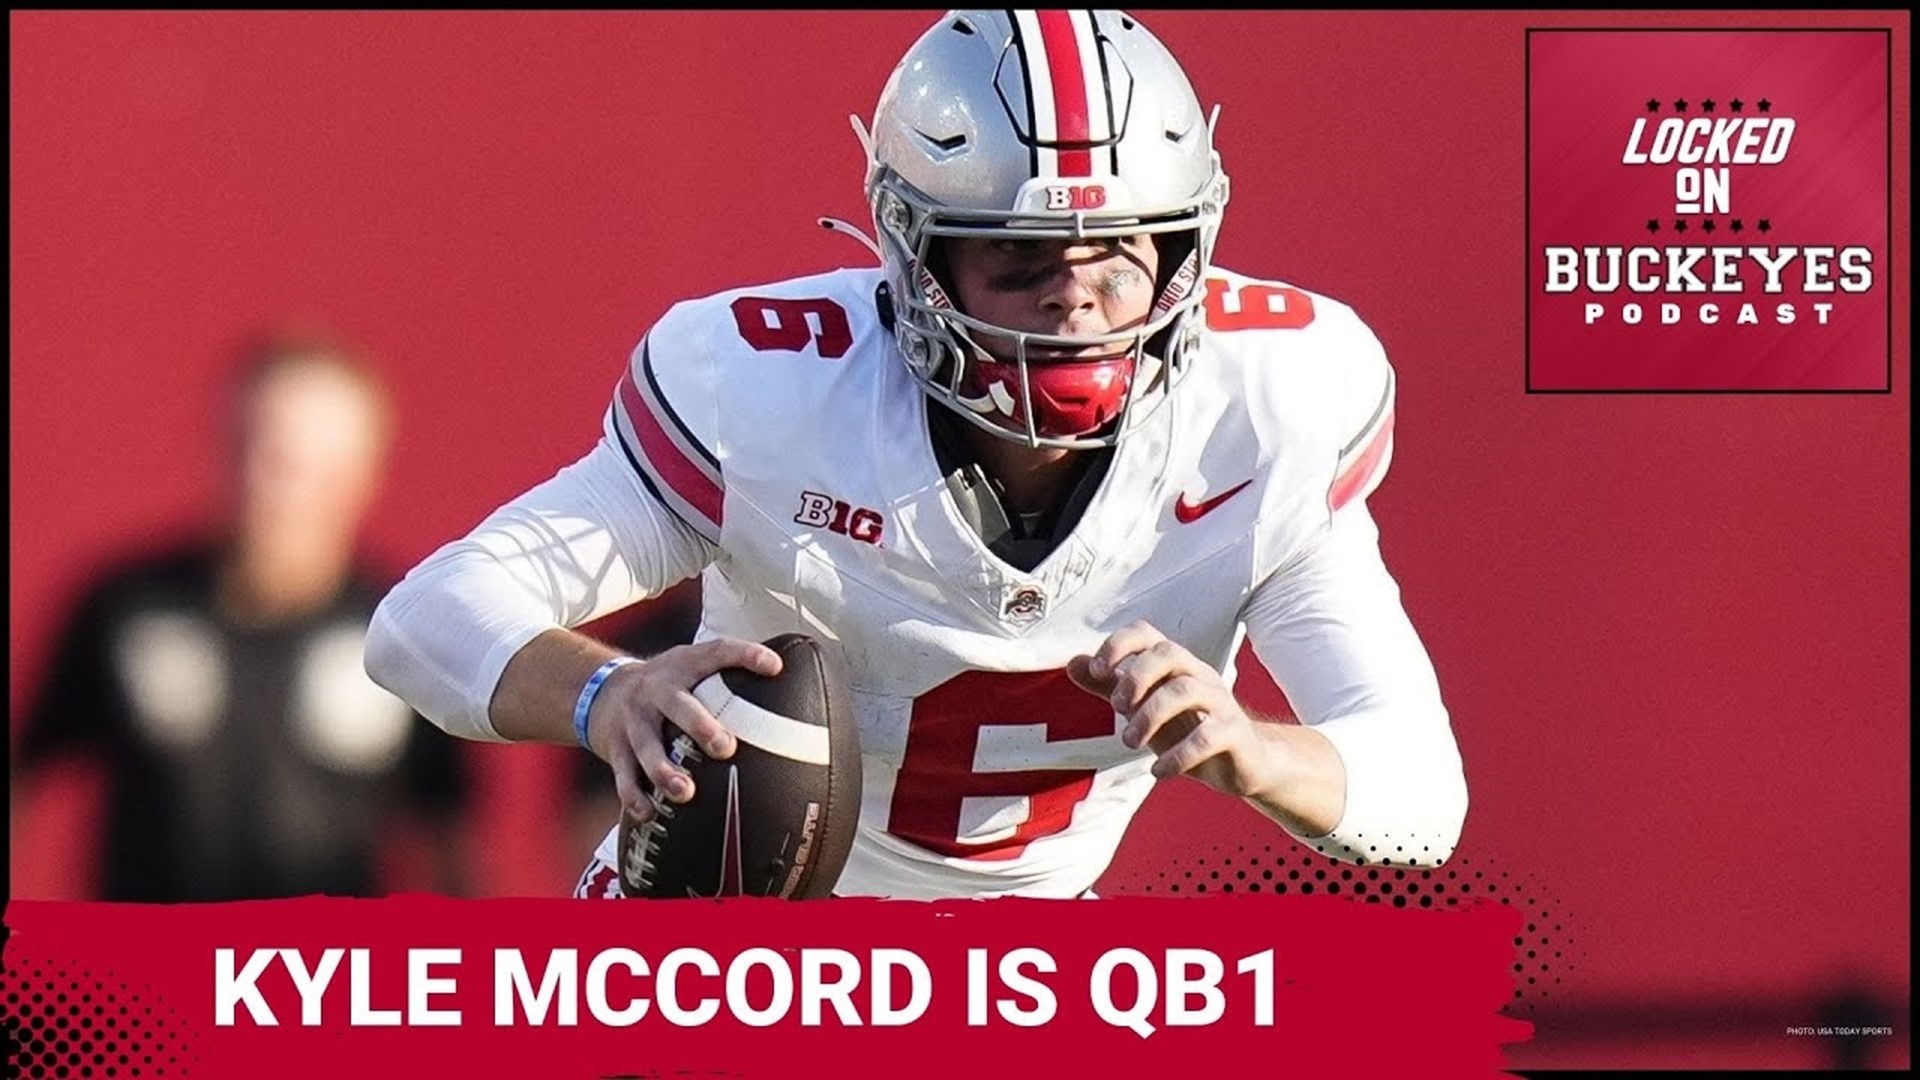 Ohio State has finally named a starting quarterback.  Ryan Day took time during his presser Tuesday to announce that Kyle McCord was named QB1 for the Buckeyes.